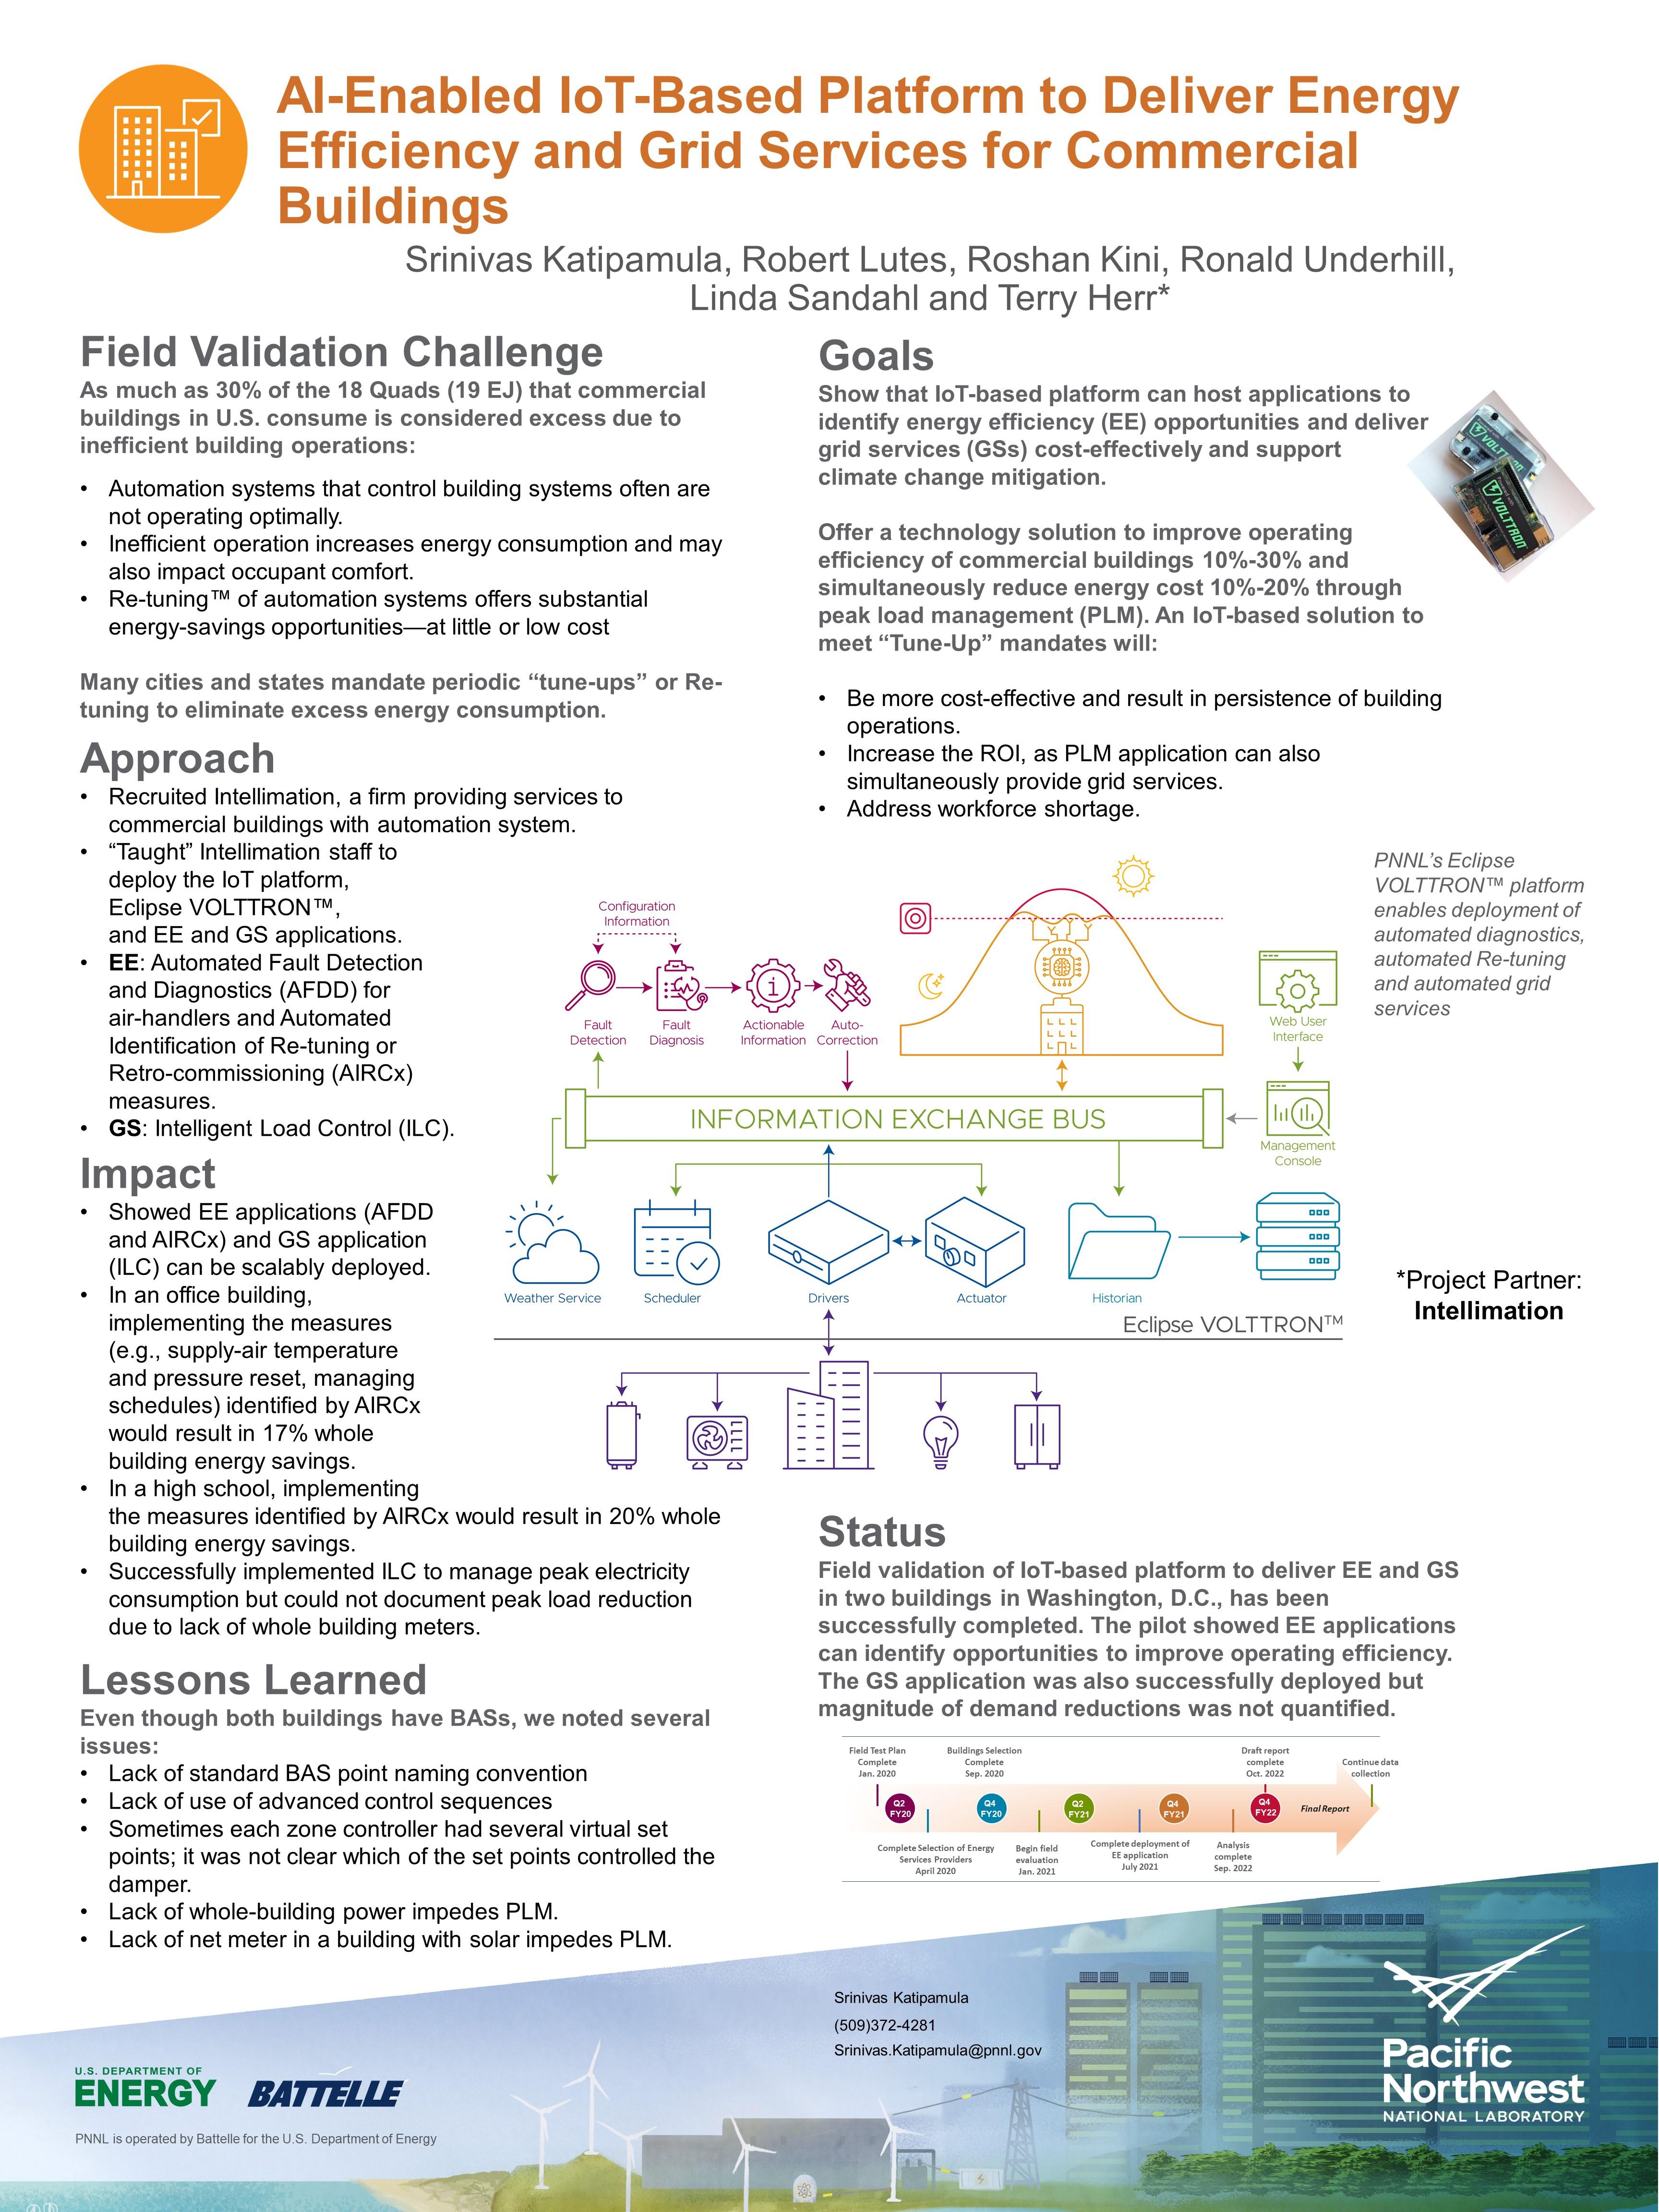 Poster showing energy efficiency and grid services applications